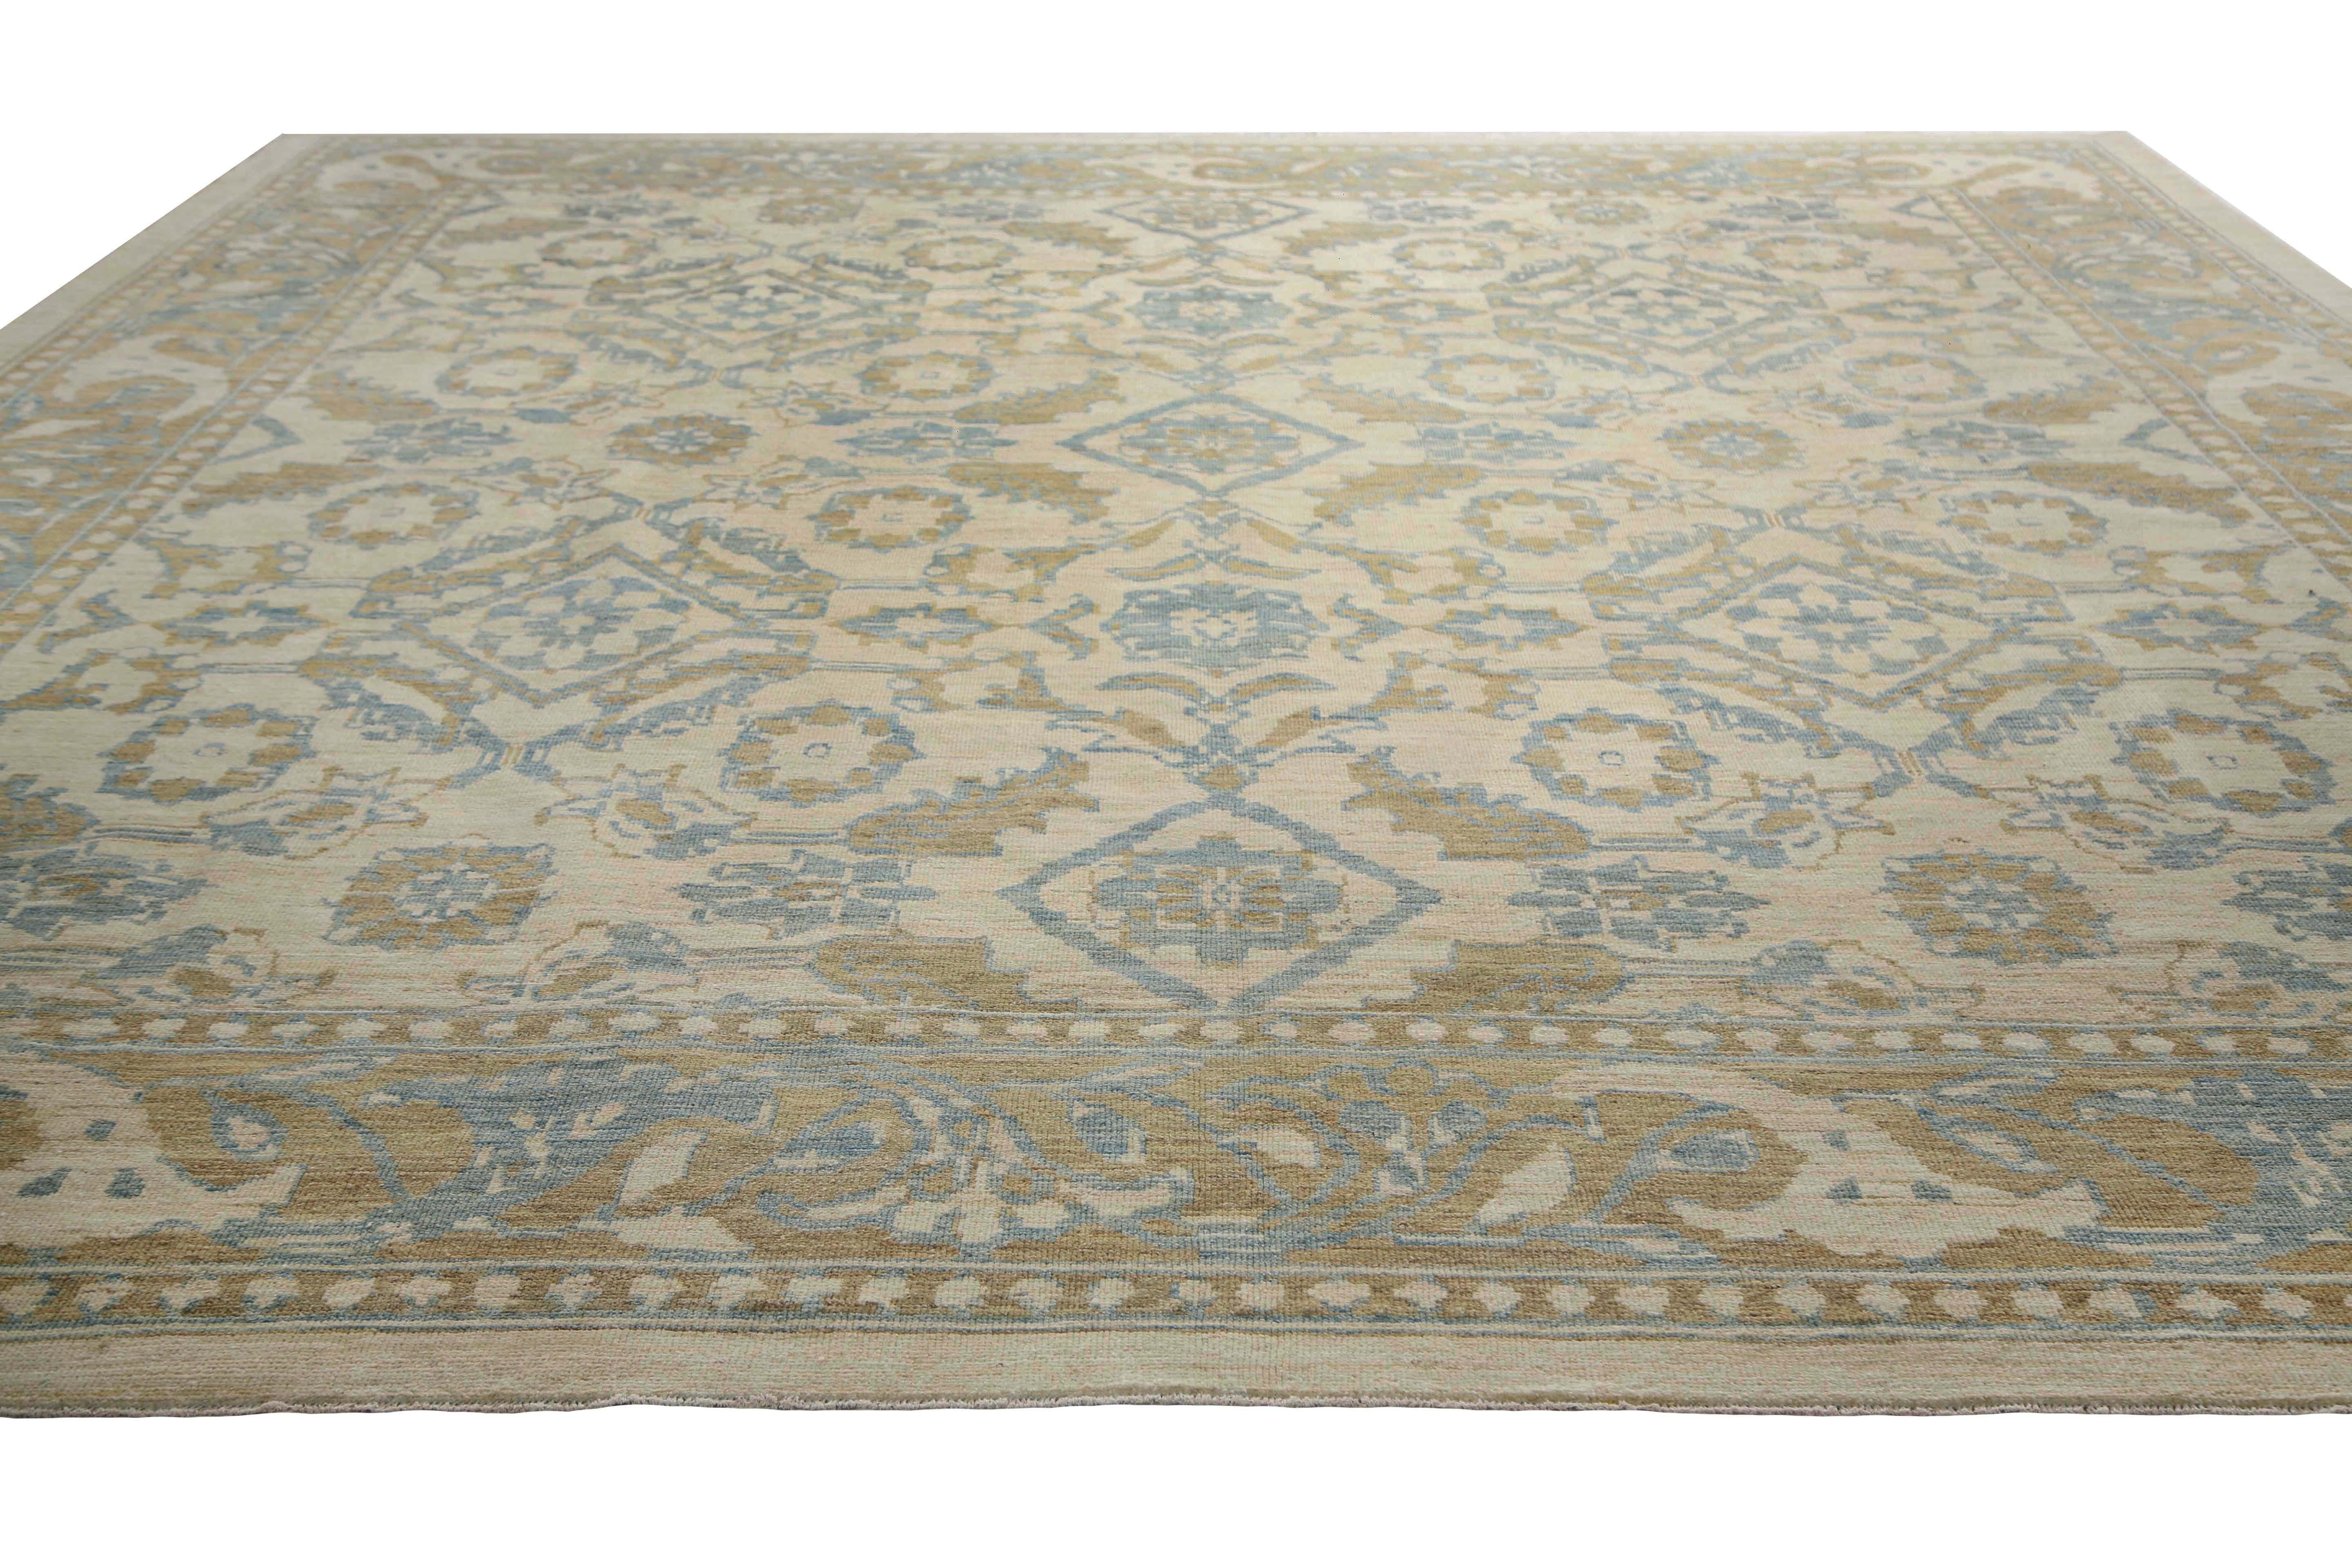 Luxurious Handmade Sultanabad Rug - Transitional Design, Blue, Green, and Yellow For Sale 6